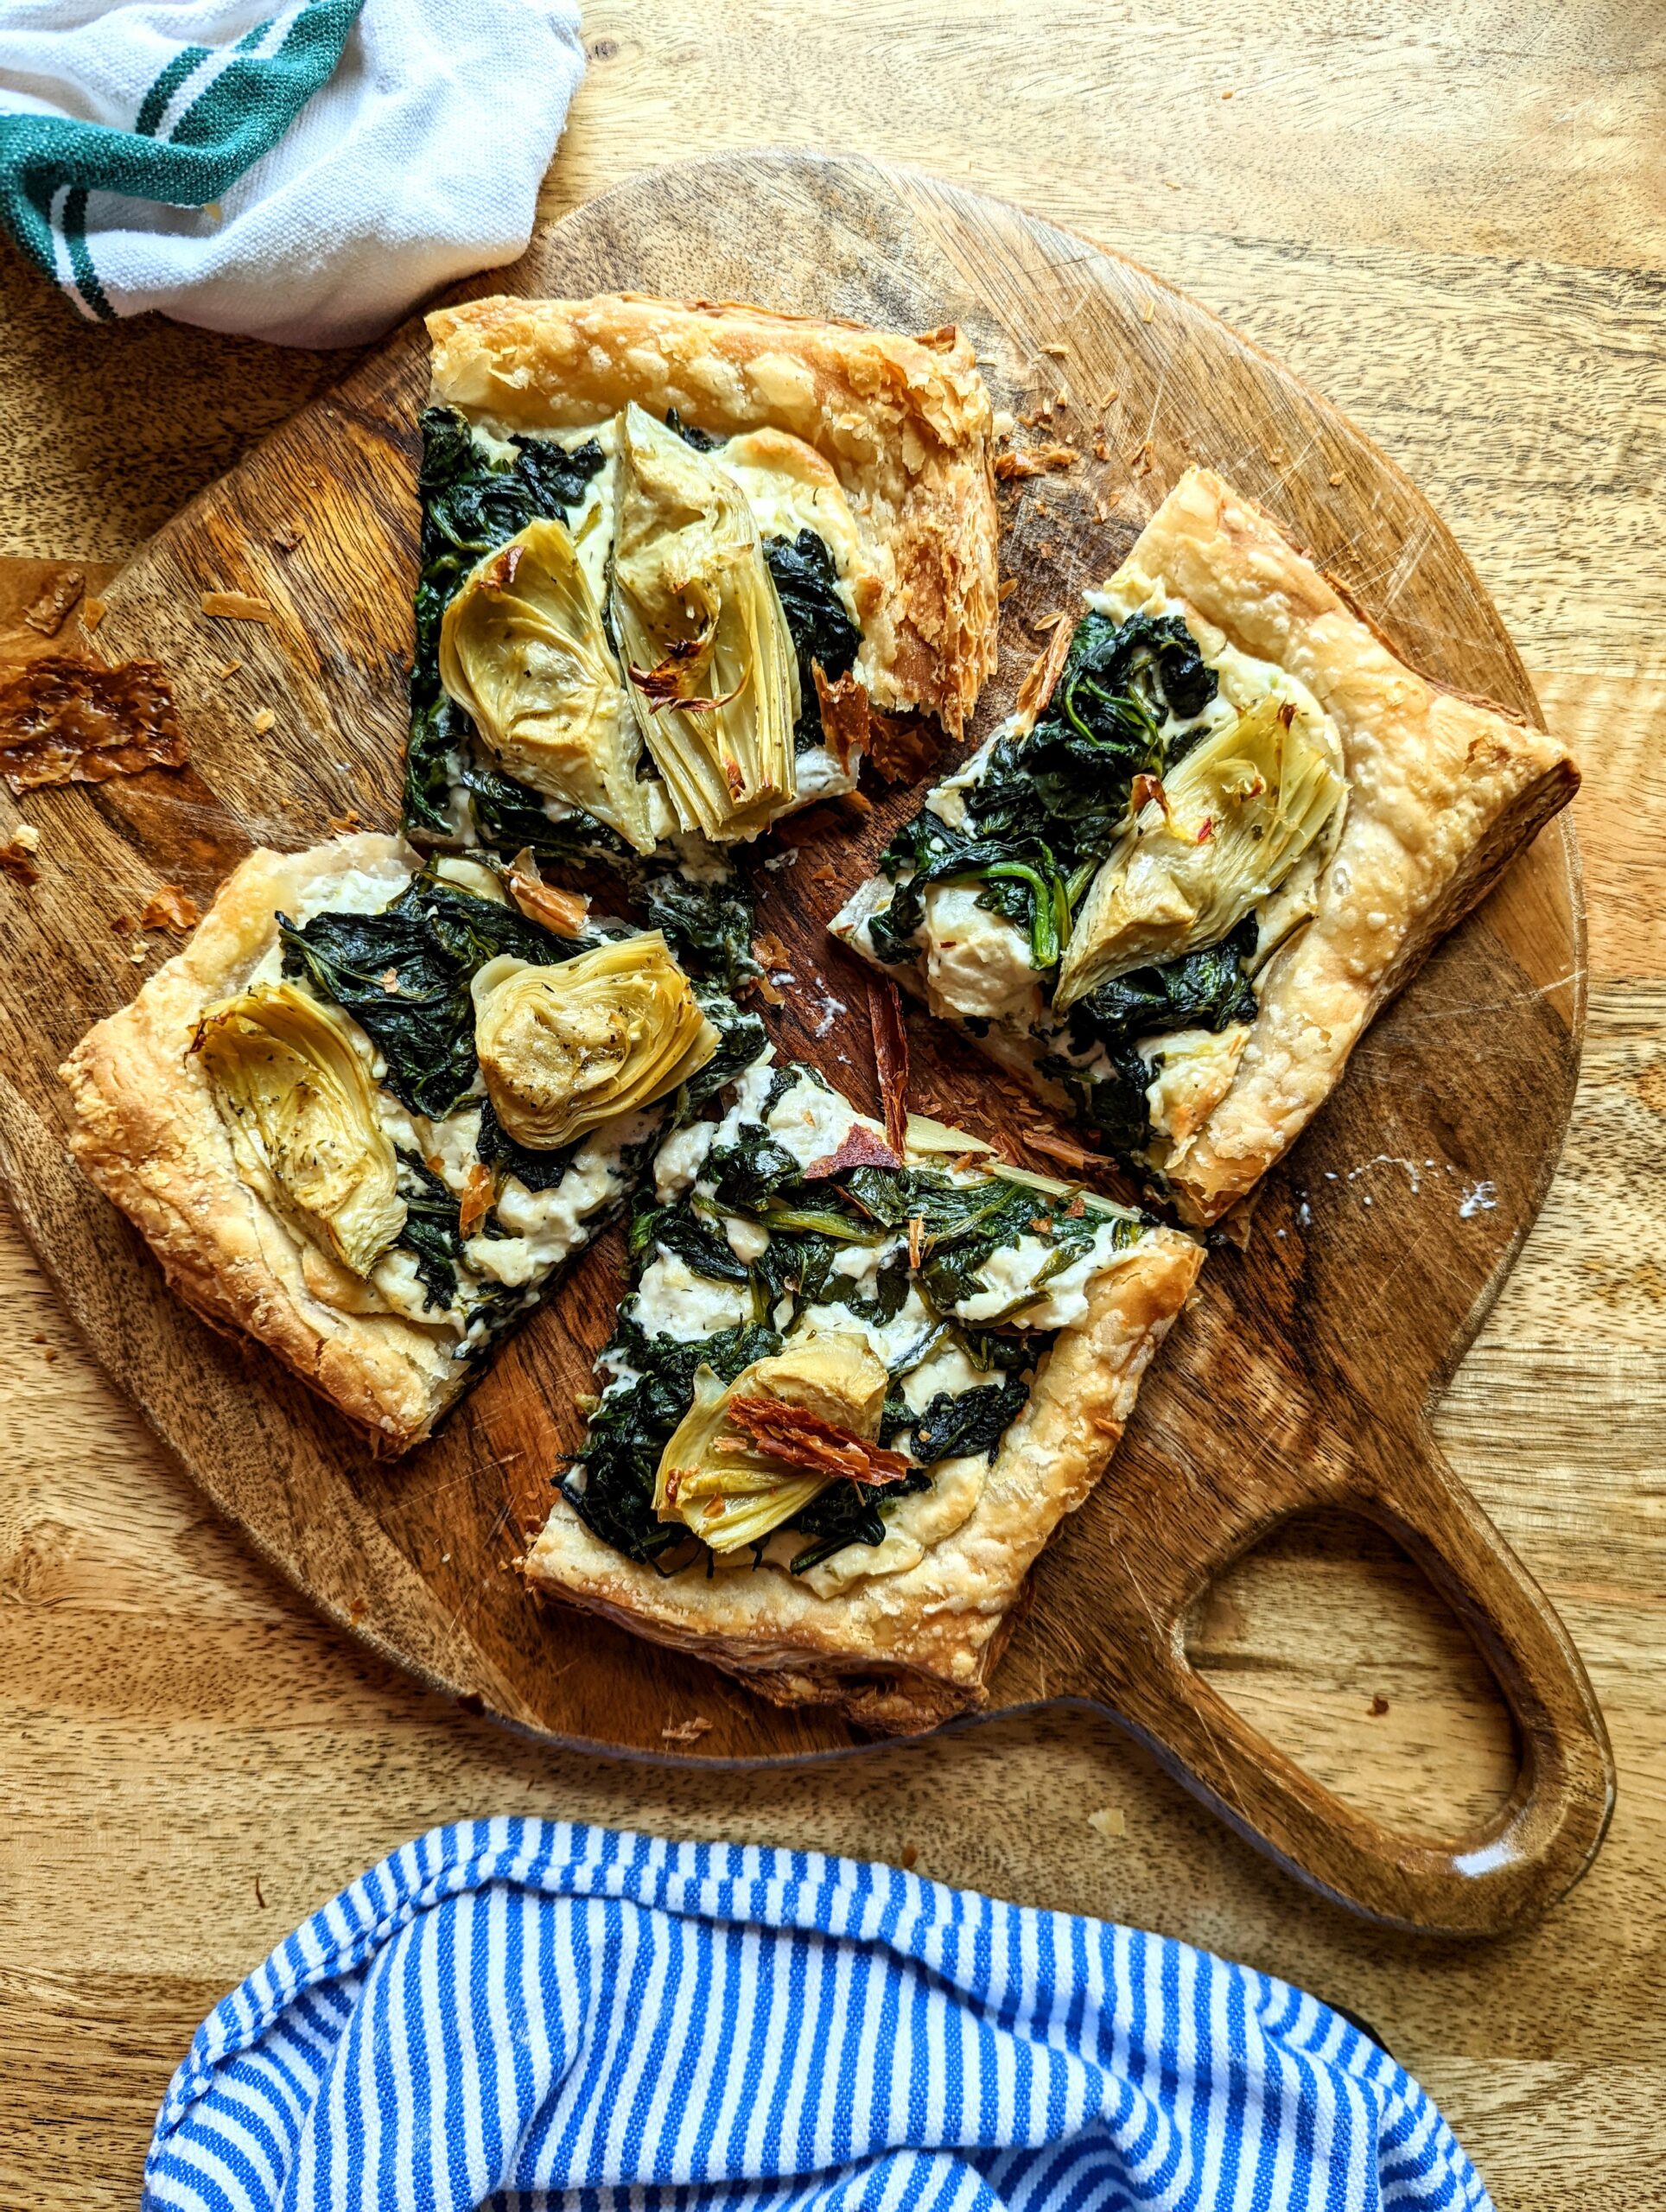 A spinach and artichoke tart on top of a circular wooden cutting board.